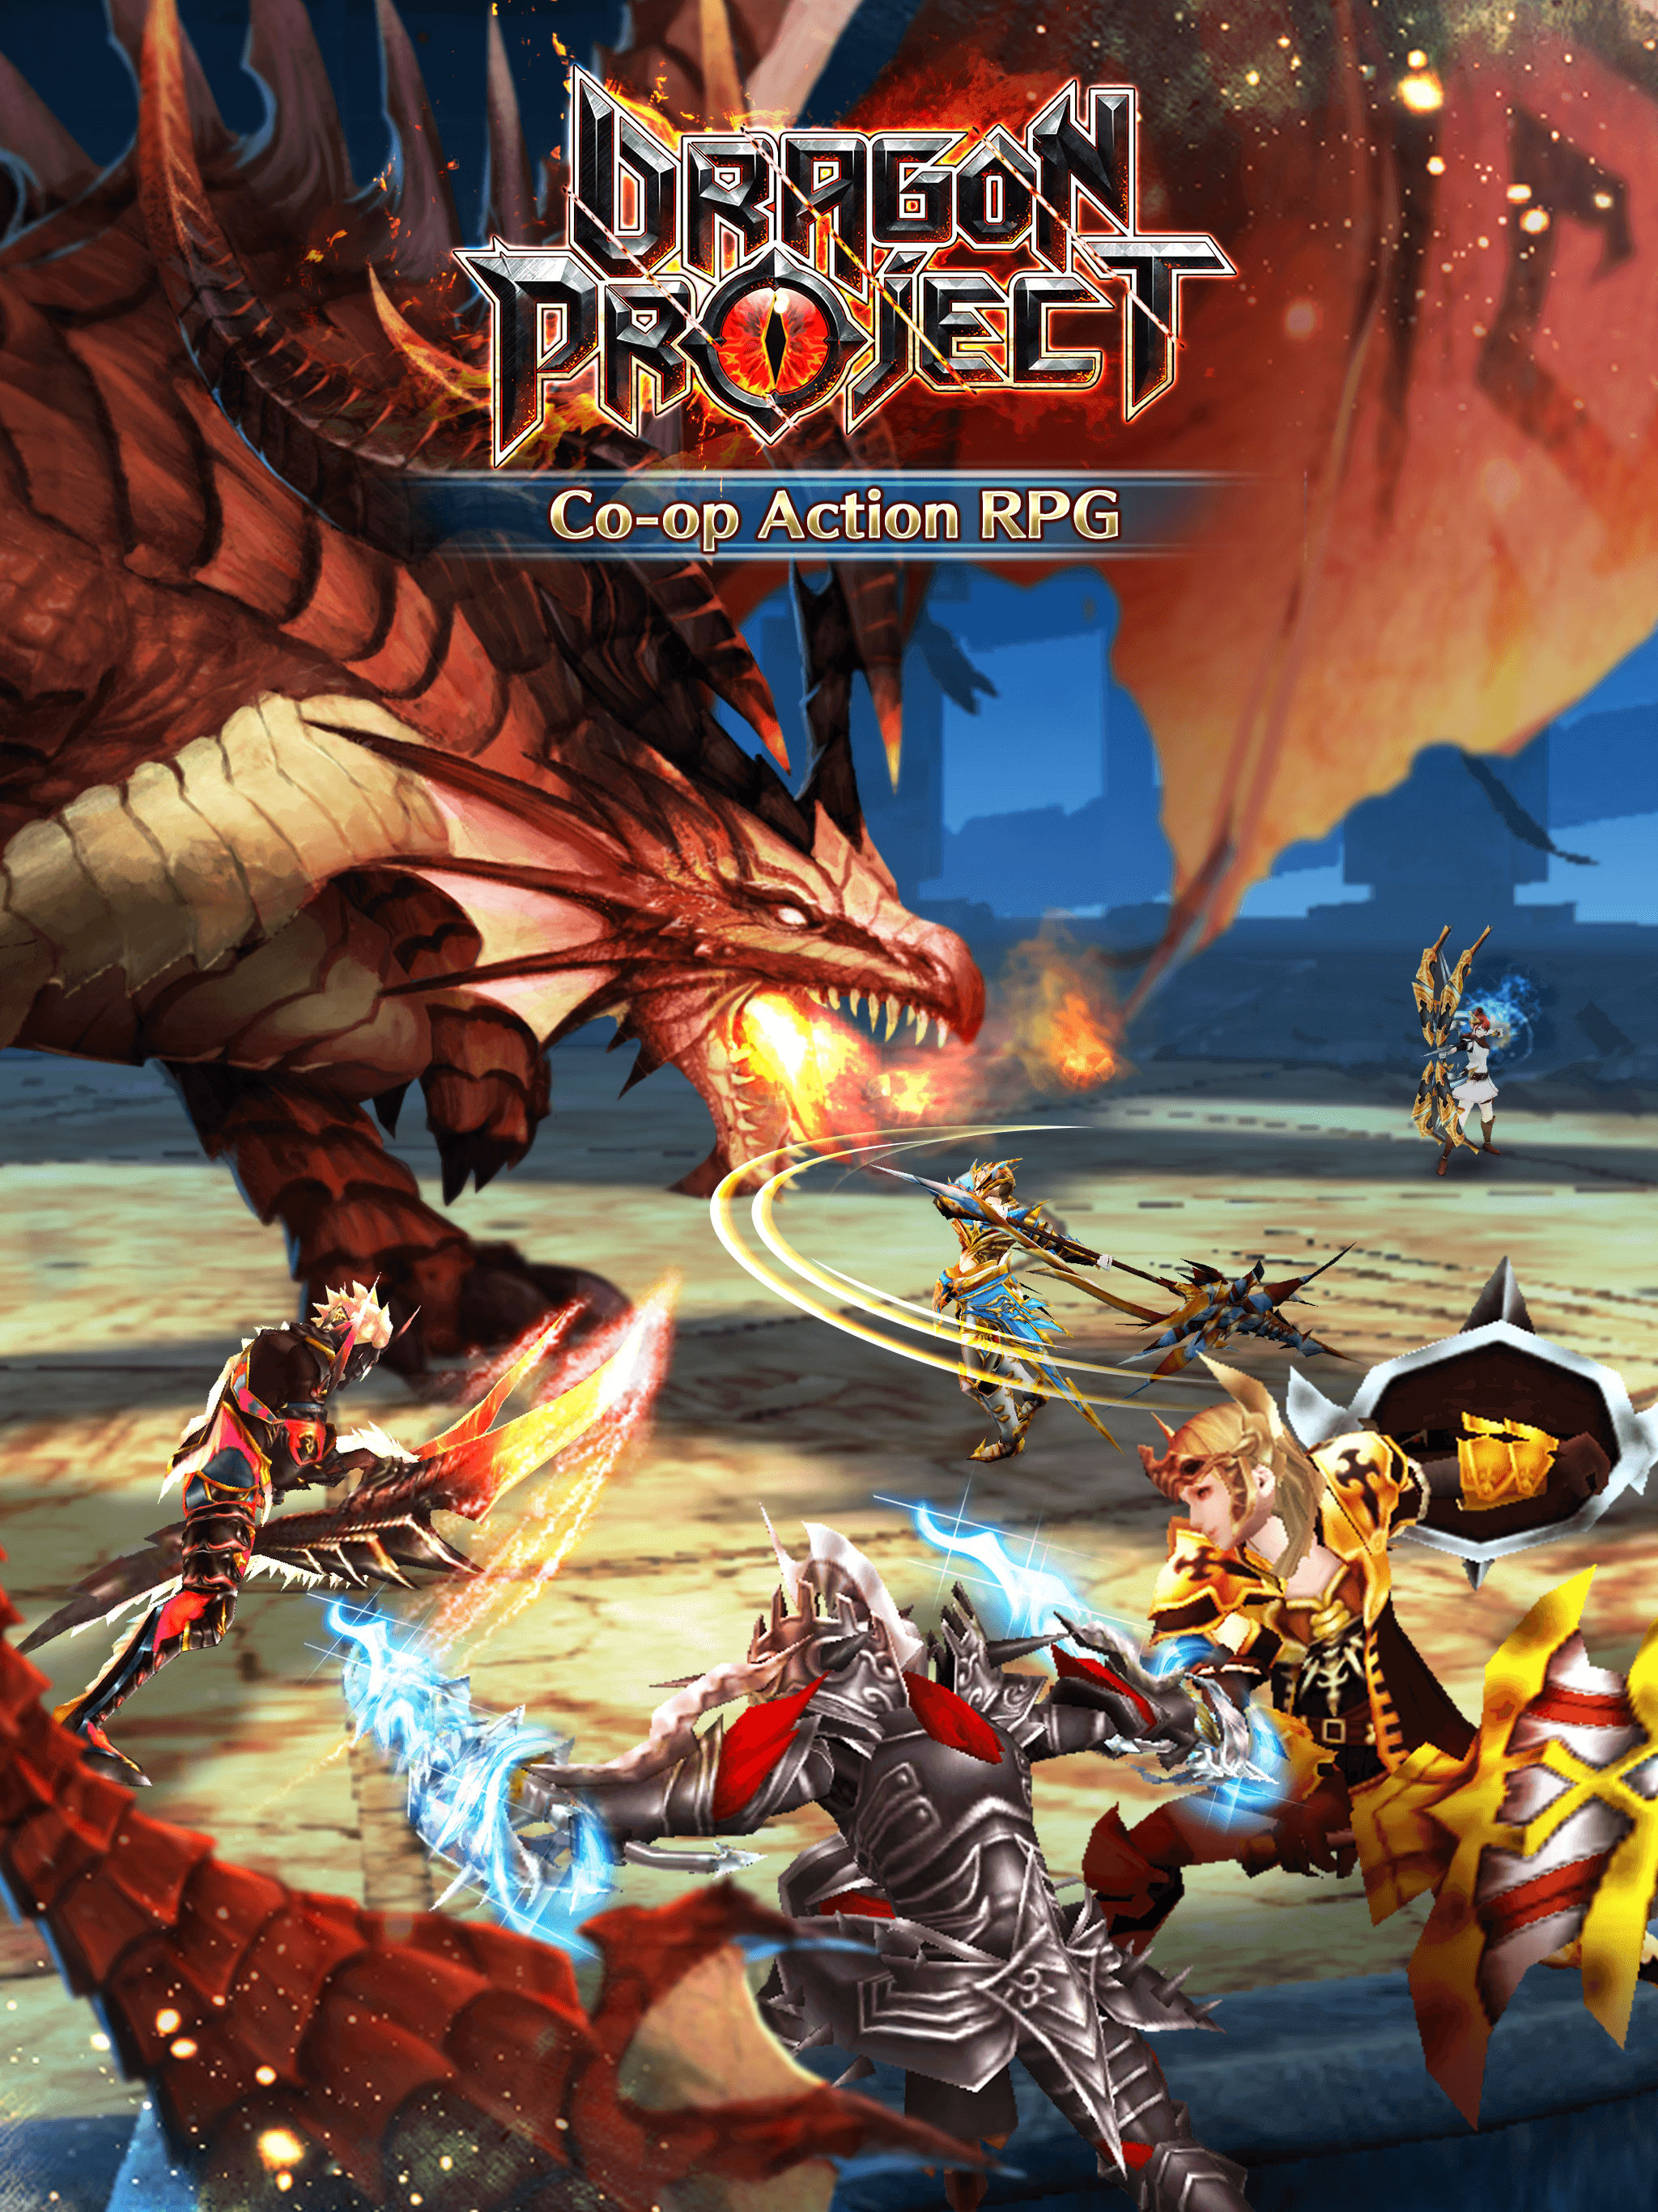 Dragon-Project-Hack-Cheats-tips-Guide.jpg